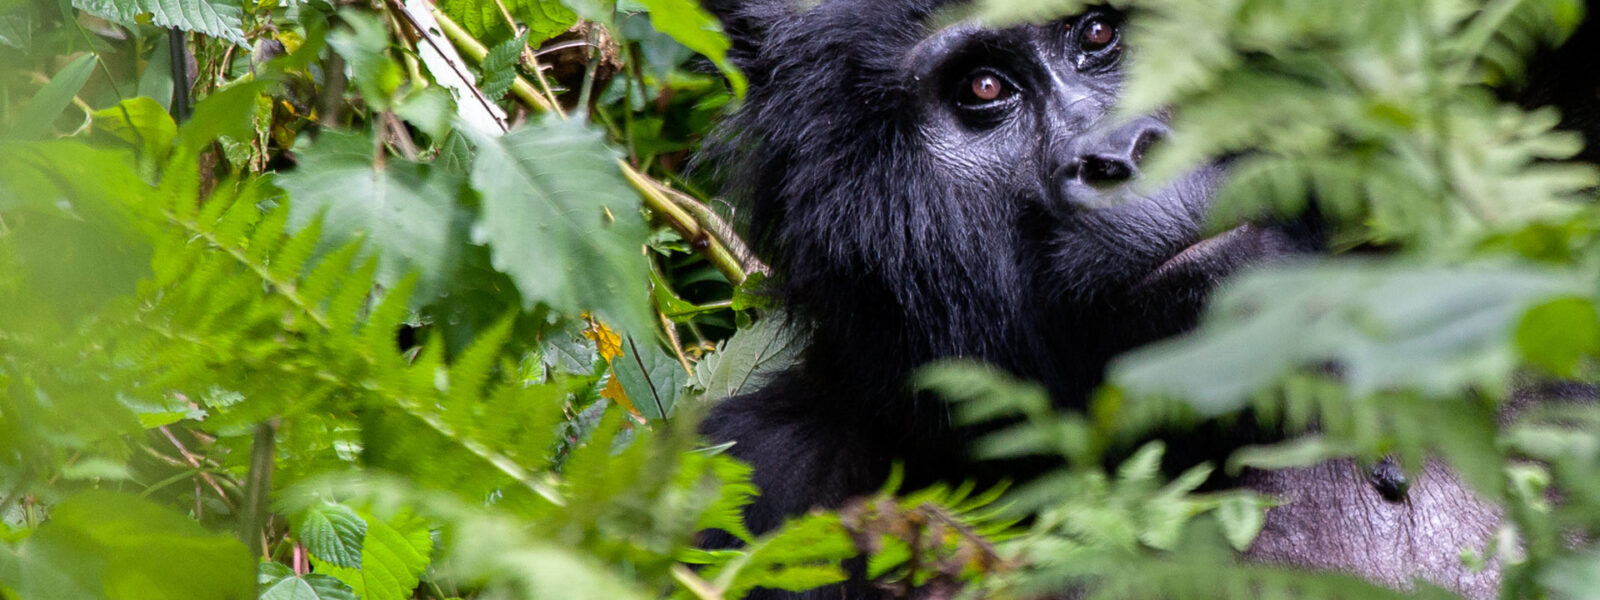 How to directly book a Gorilla Permit with UWA